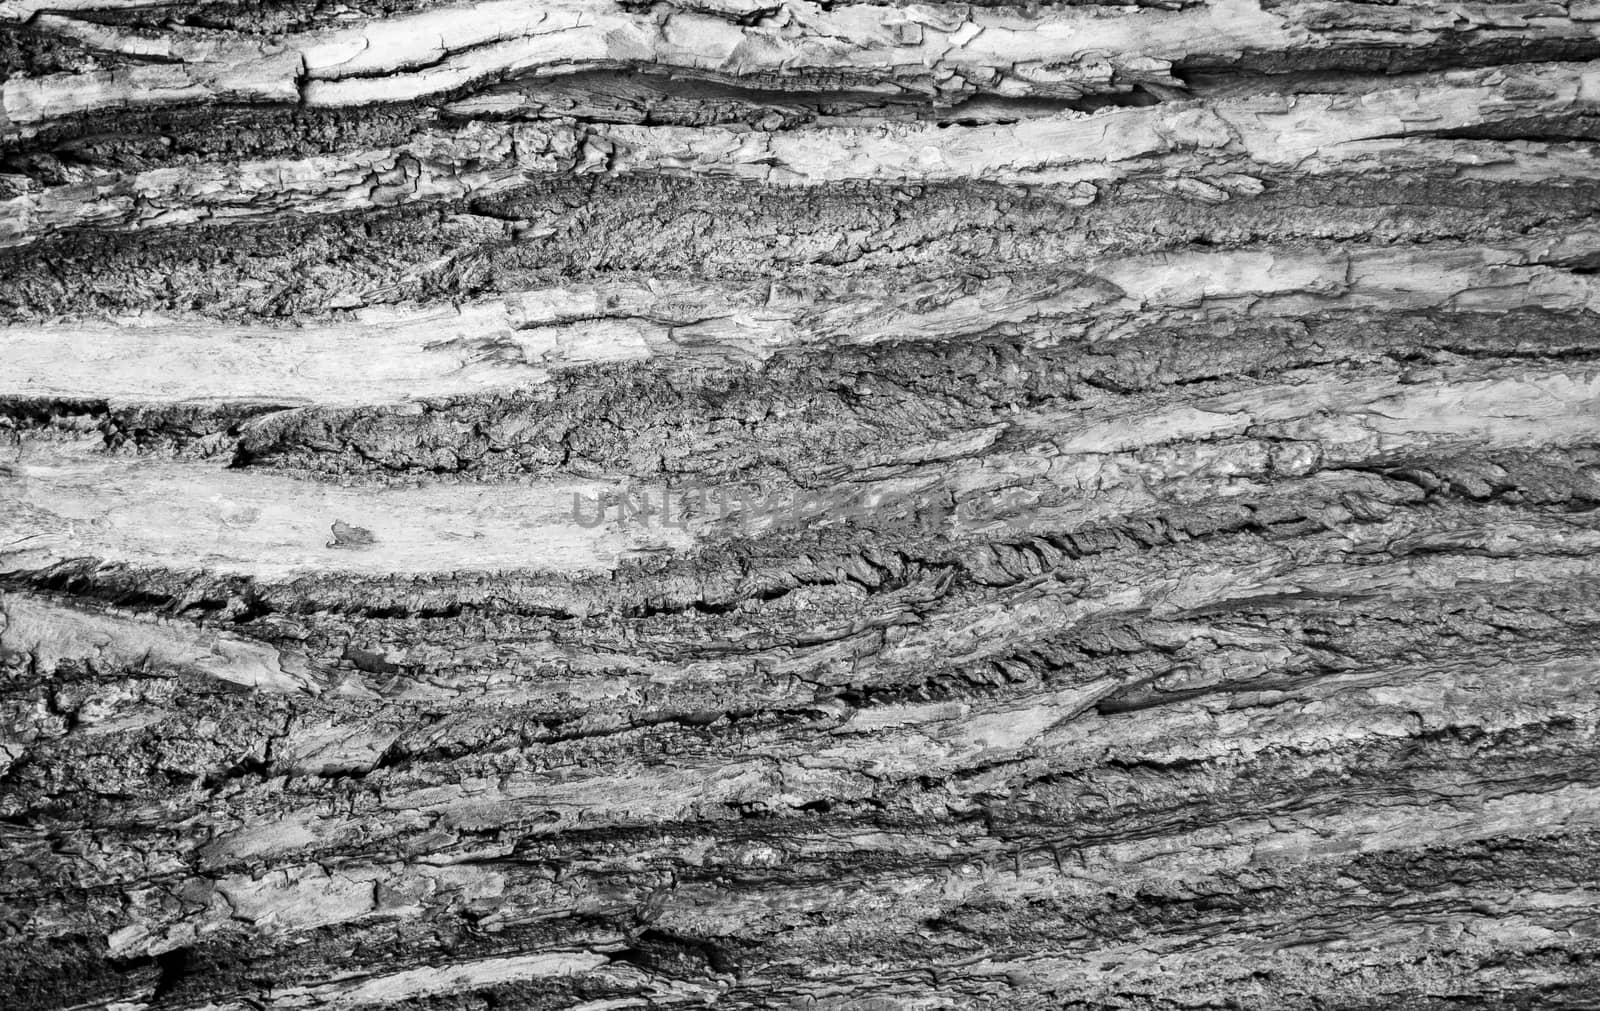 Monochrome old wood texture rough bark of the tree lying on the ground